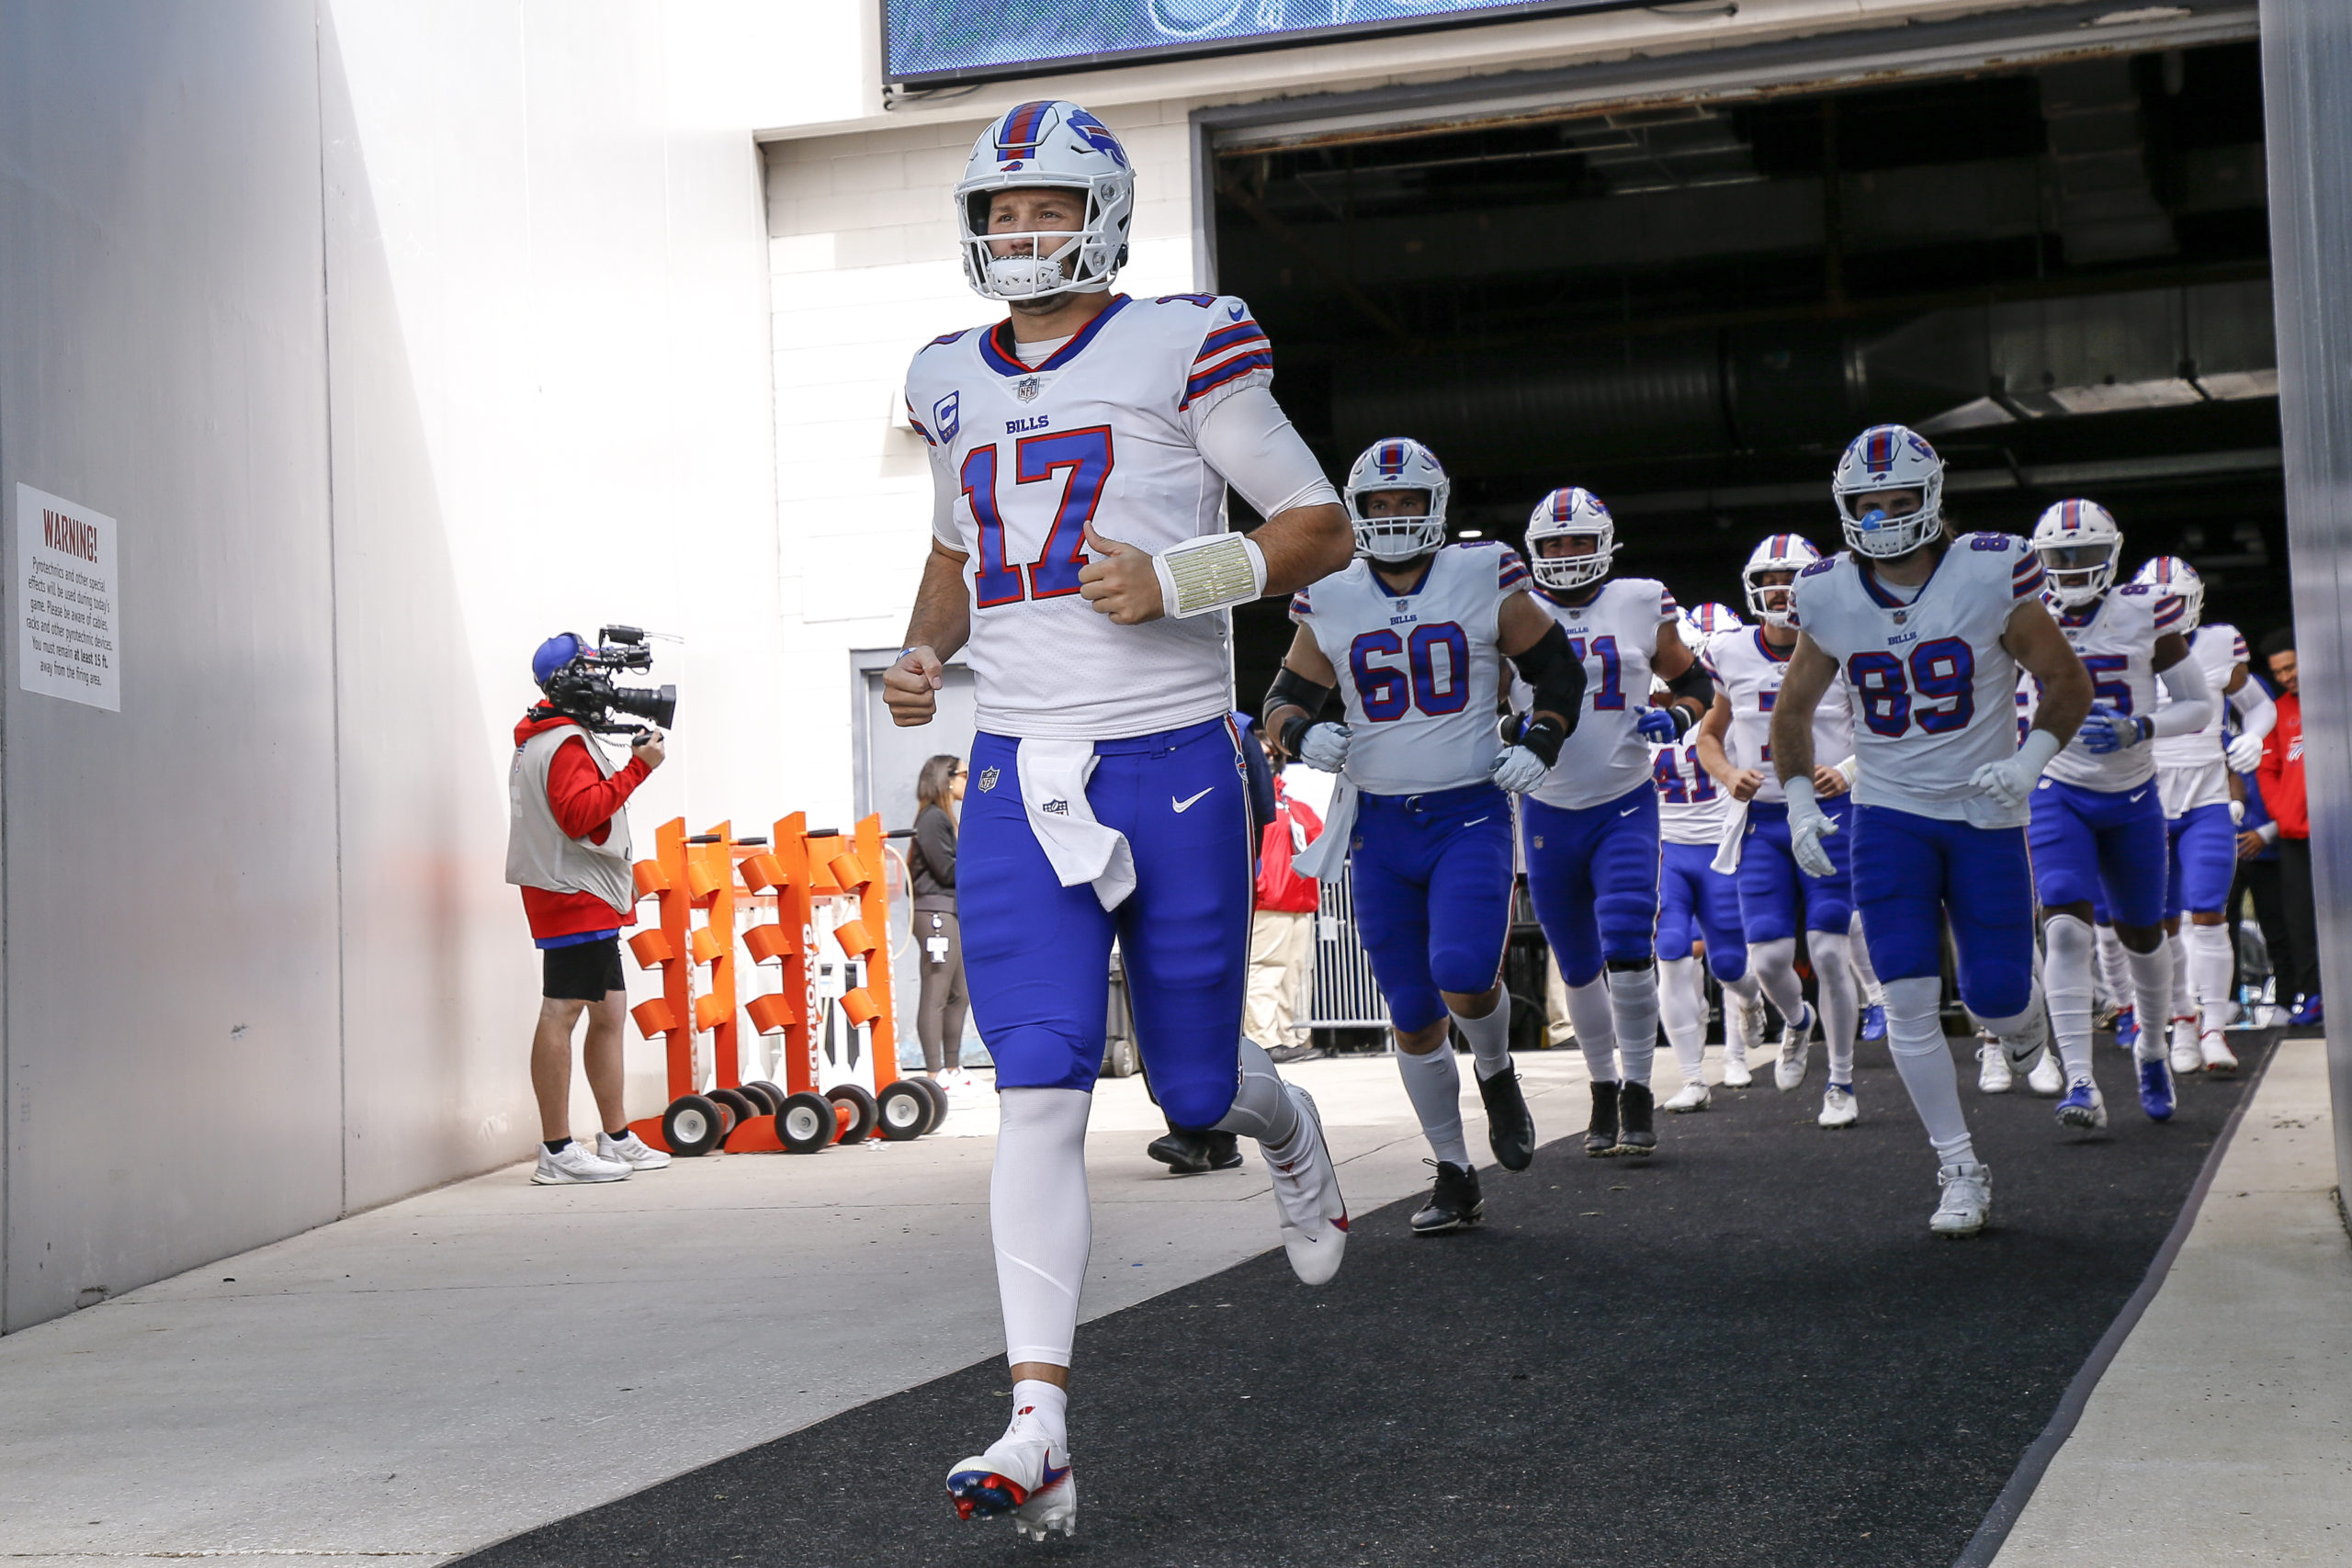 JACKSONVILLE, FL - NOVEMBER 7: Quarterback Josh Allen #17 of the Buffalo Bills leads his team to the field before the start of the game against the Jacksonville Jaguars at TIAA Bank Field on November 7, 2021 in Jacksonville, Florida. The Jaguars defeated the Bills 9 to 6. (Photo by Don Juan Moore/Getty Images)